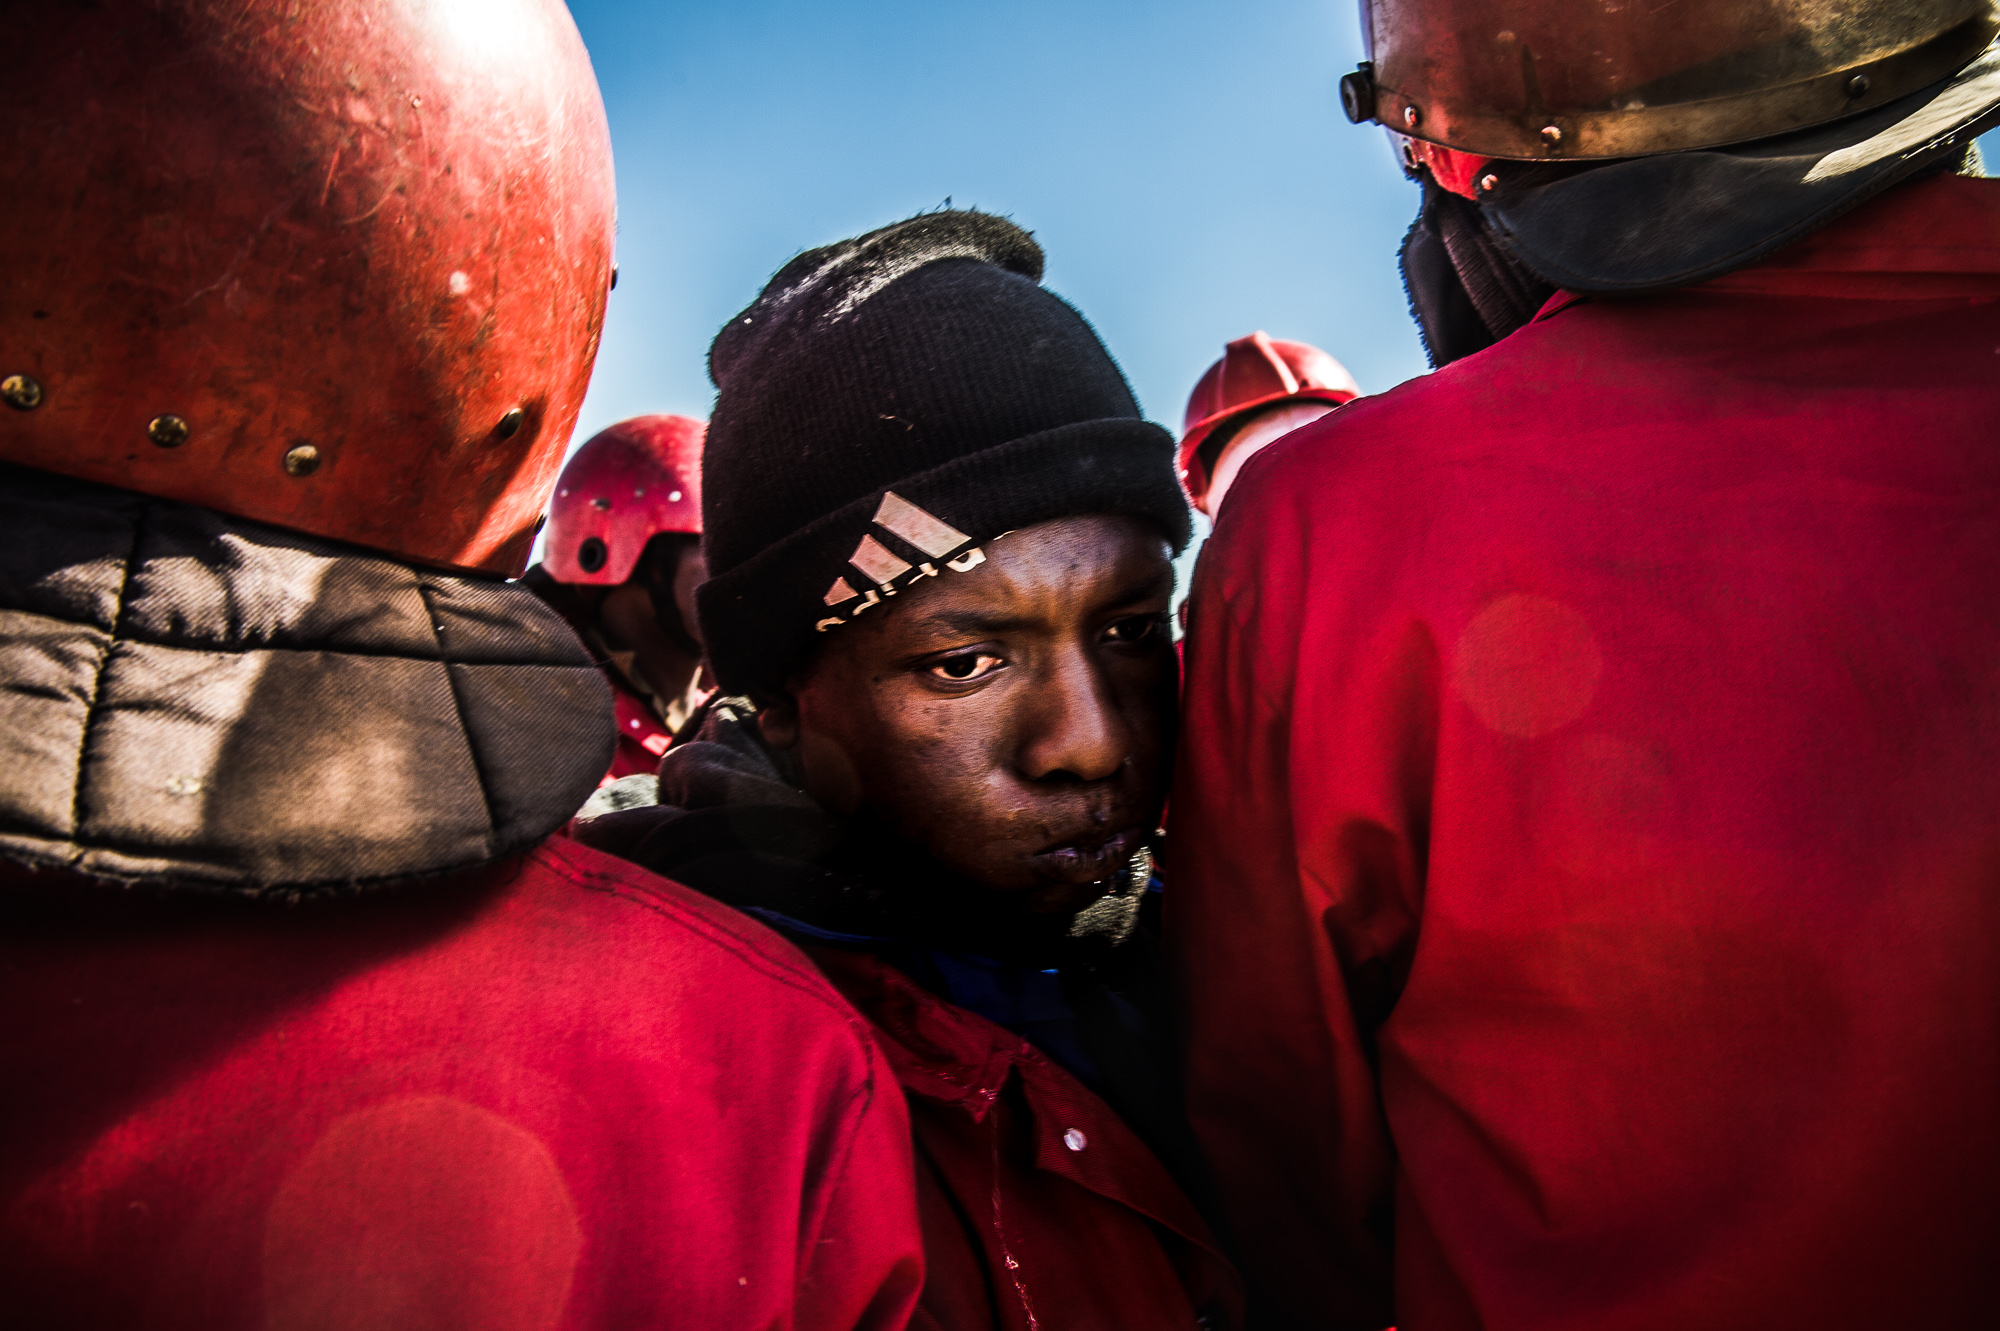  South Africa, Soshanguve, 11.09.2018 // Landgrabbs are occurring more often lately. In this instant, like in many others, the police refused to clear the settlement, so the Red Ants eviction-service was called in. Workers of the Red Ants security gr